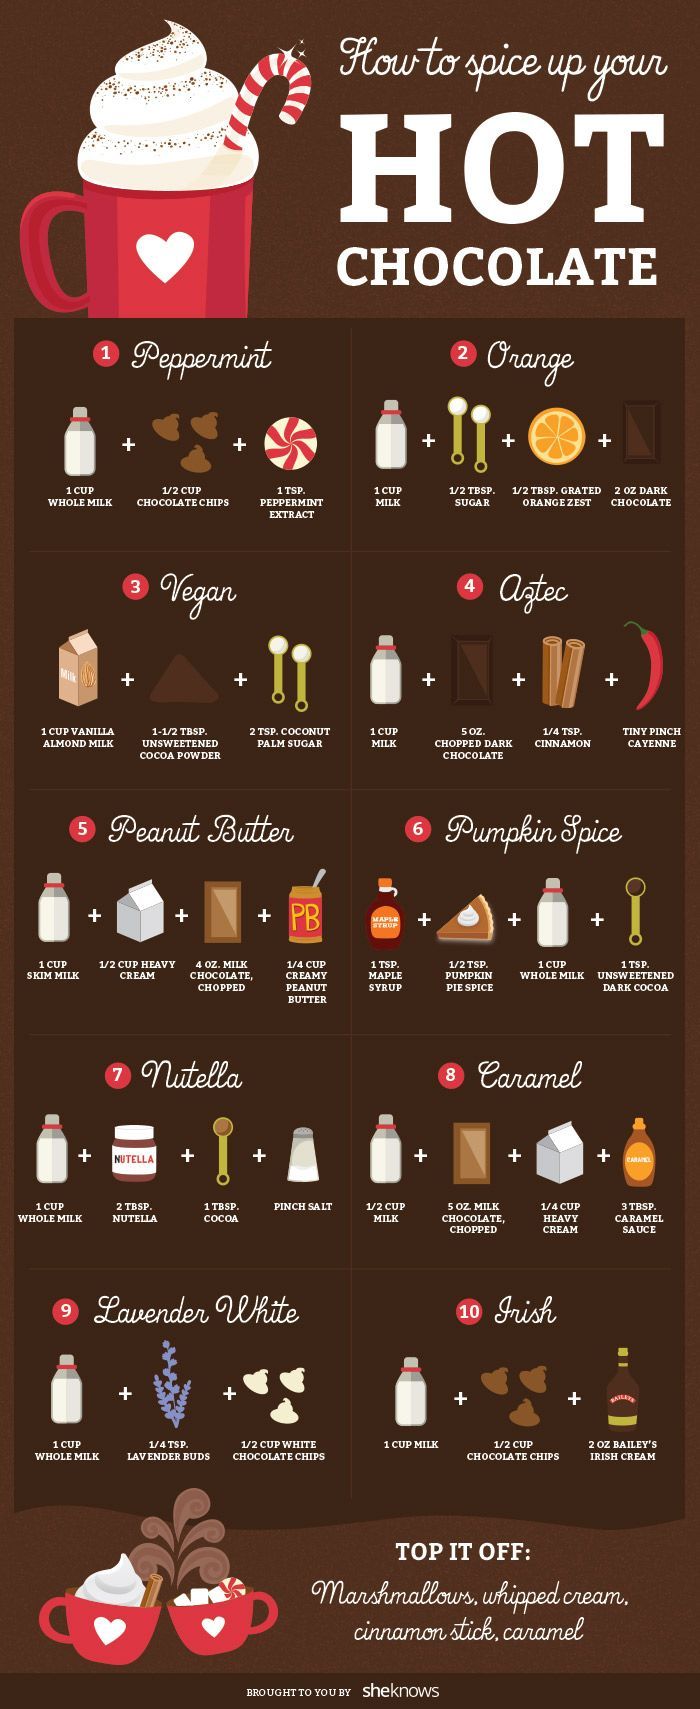 Great flavor pairings for your hot chocolate this winter! Courtesy of @Huffington Post.